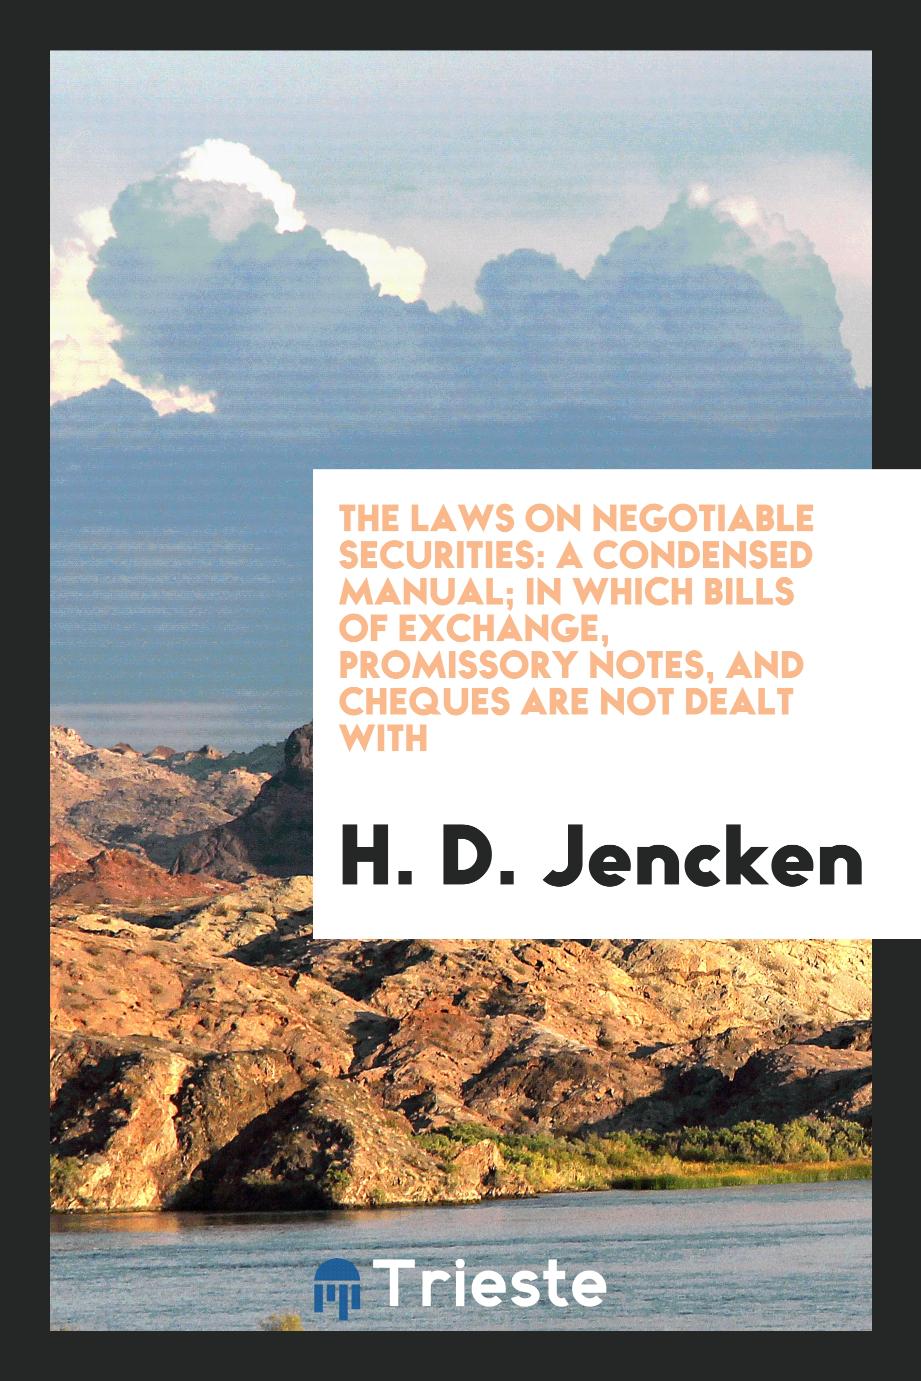 The Laws on Negotiable Securities: A Condensed Manual; in which Bills of Exchange, Promissory notes, and cheques are not dealt with